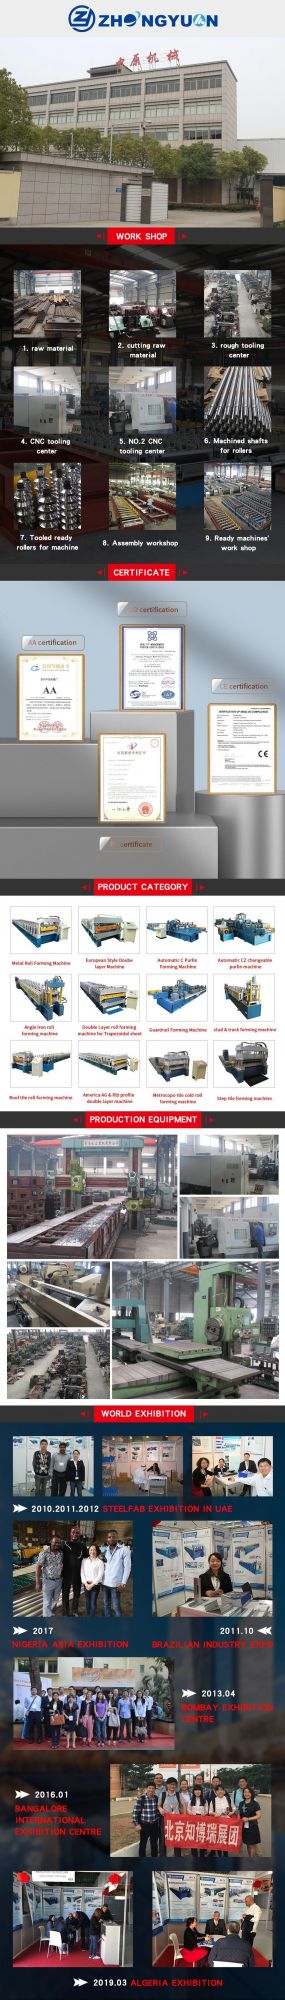 Automatic Color Steel Coils Corrugated Iron Sheet Trapezoidal Profile Roofing Tile Roll Making Machine with ISO 9001 Quality Certificate